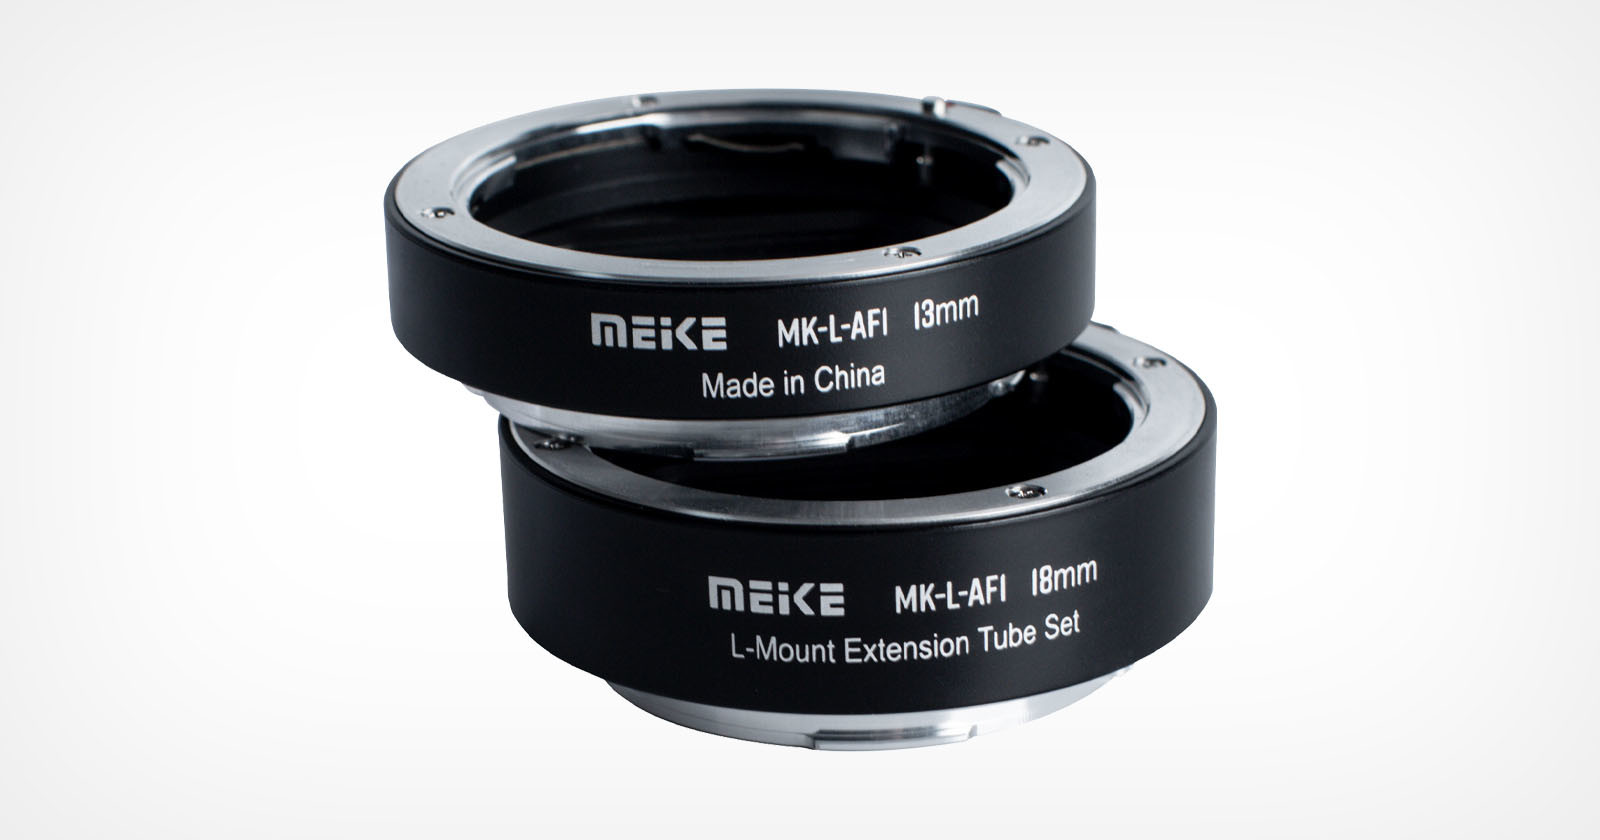 Meike Launches AF Macro Extension Tubes for Panasonic Cameras